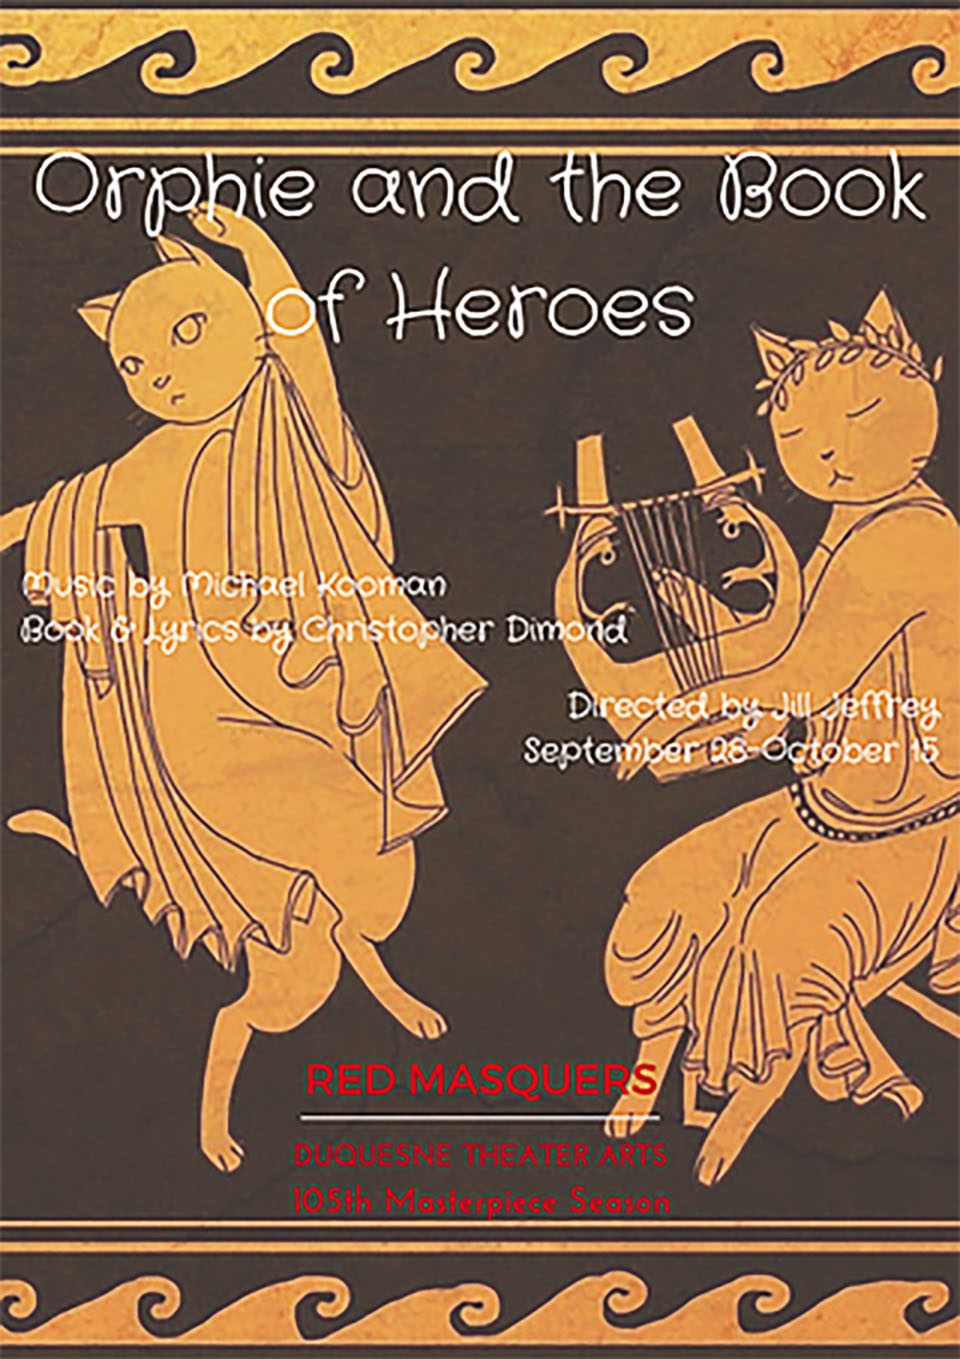 'Orphie and the Book of Heroes'